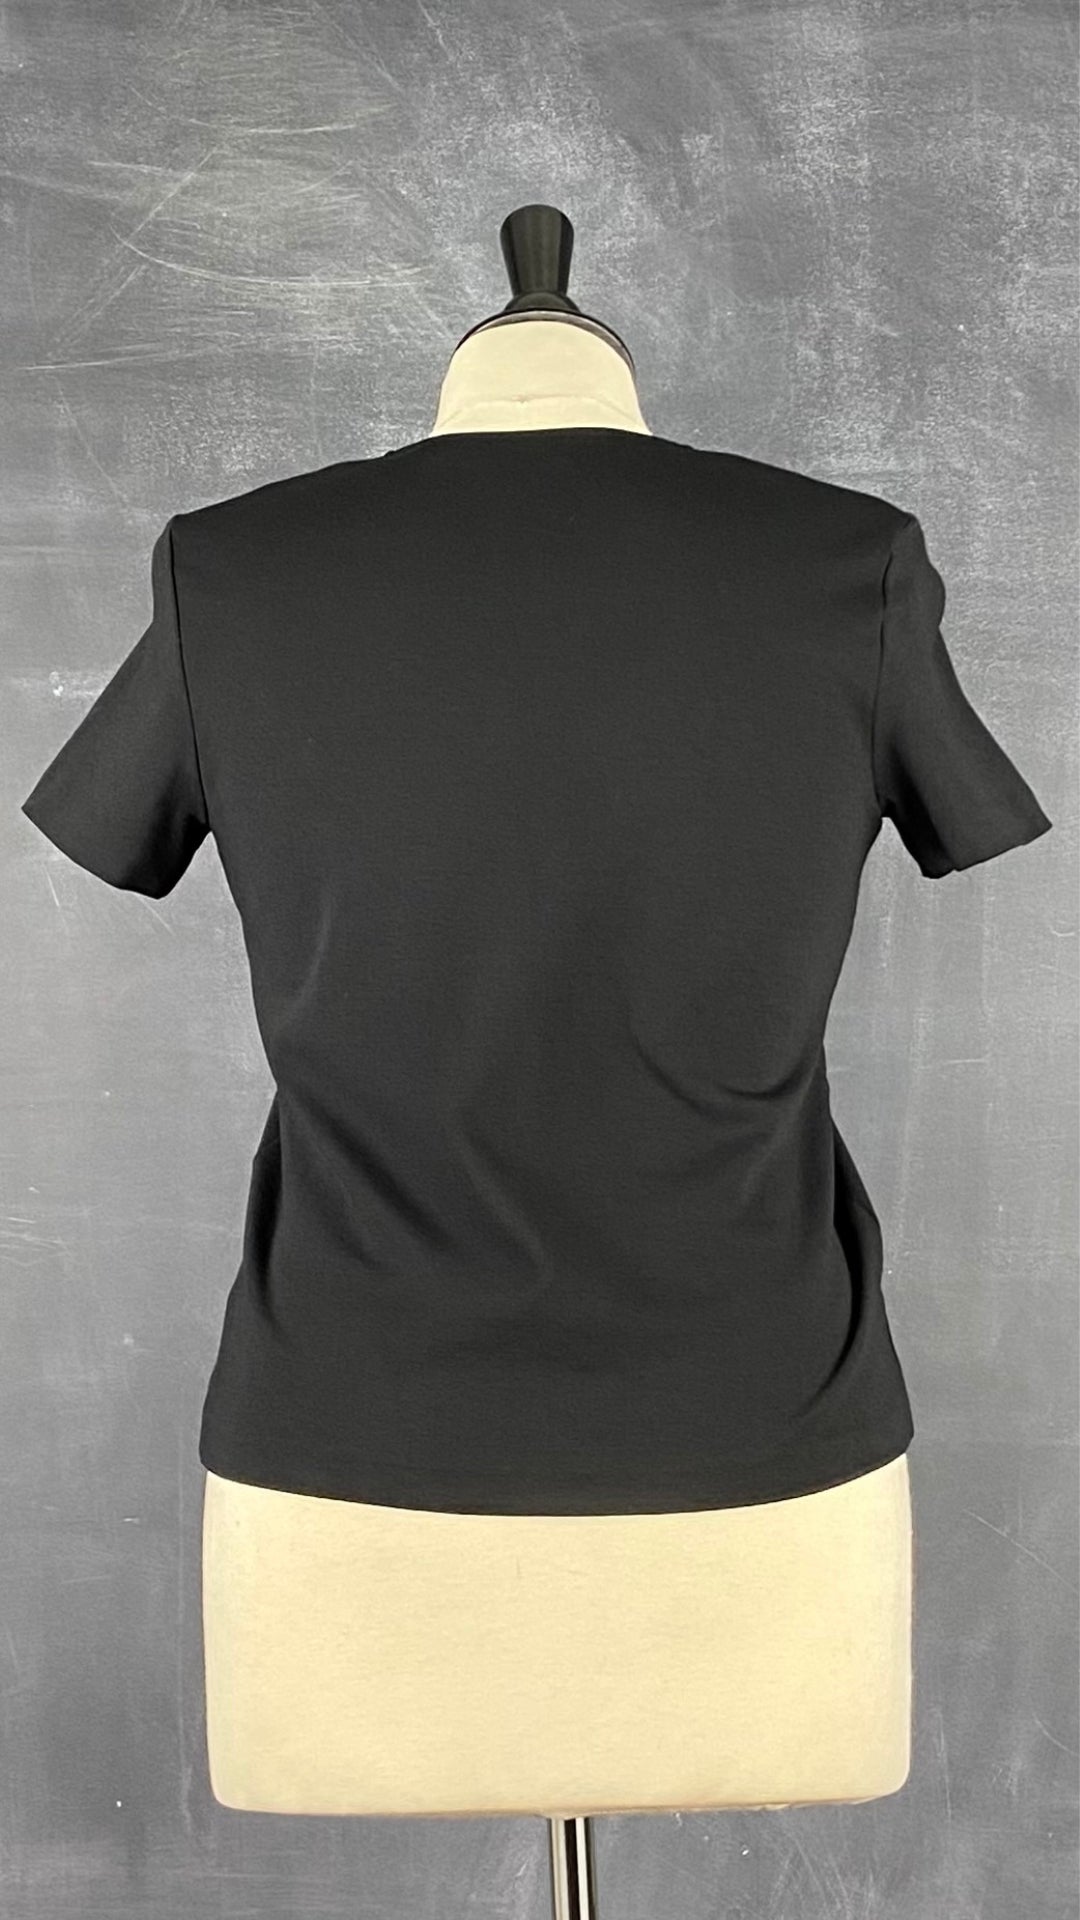 T-shirt luxueux noir col v profond Theory, taille small. Vue de dos.